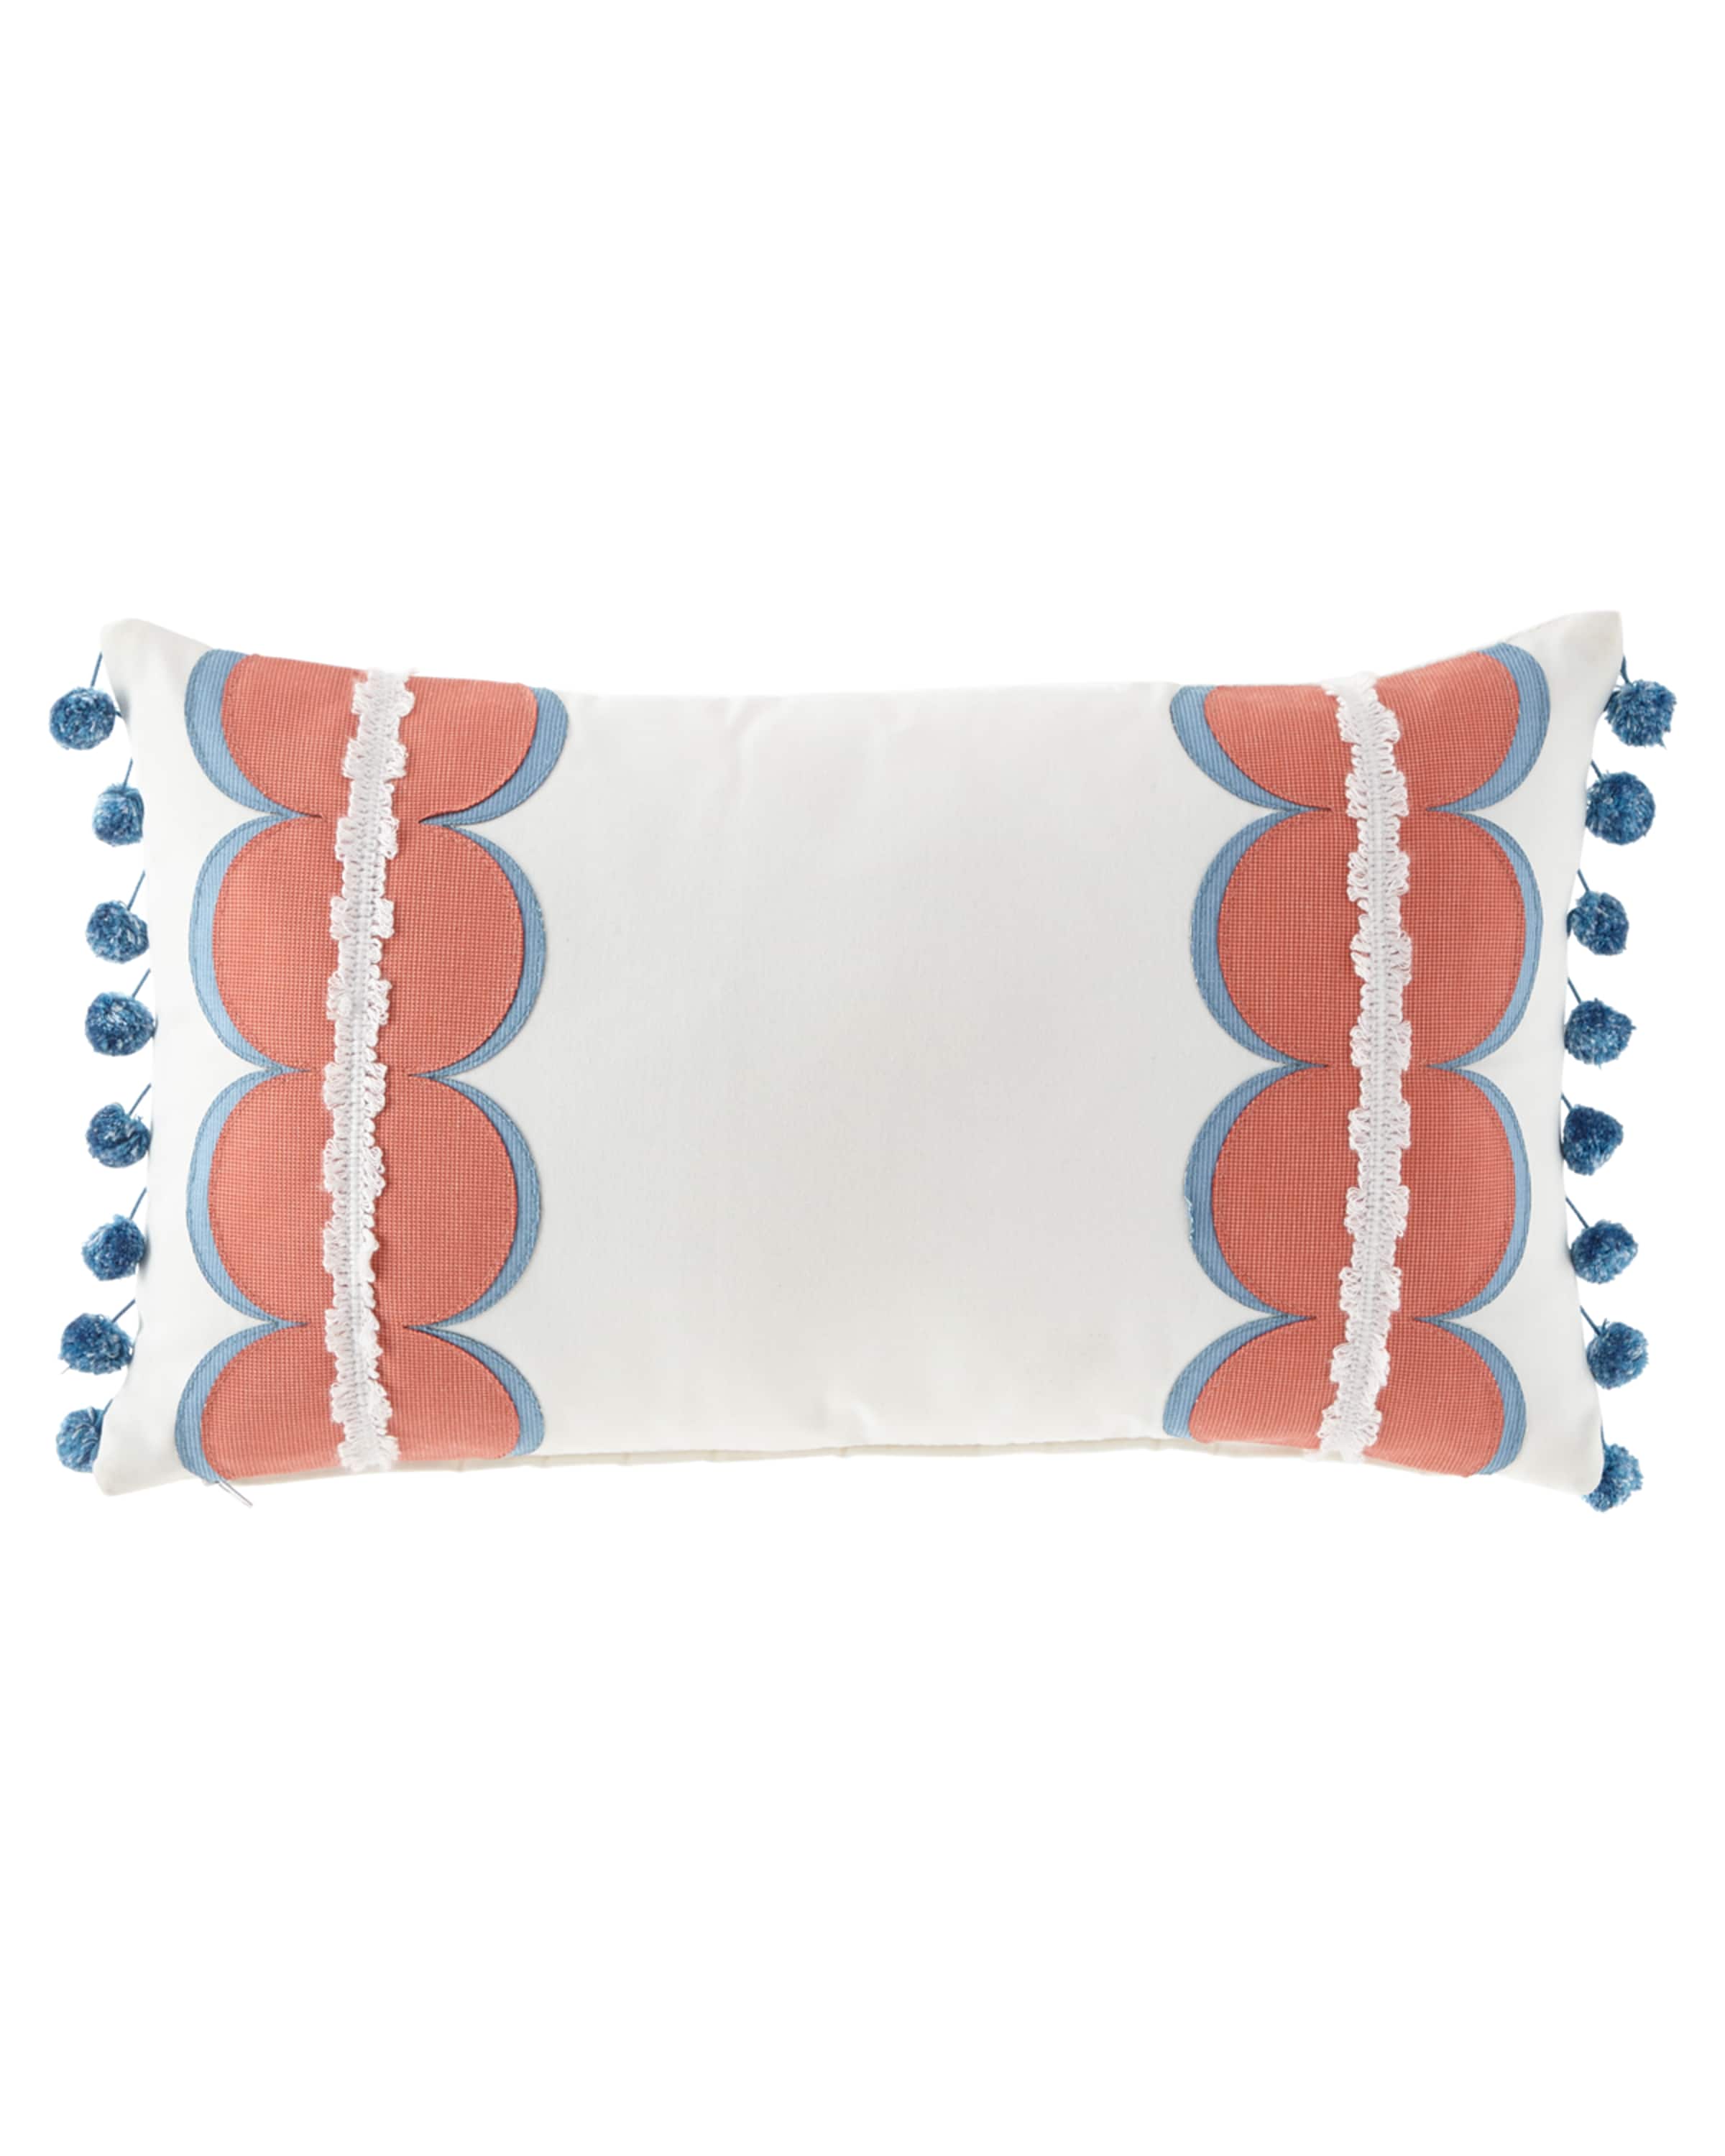 Eastern Accents Celerie Kemble Wicking Cloud Pillow, 13" x 22"